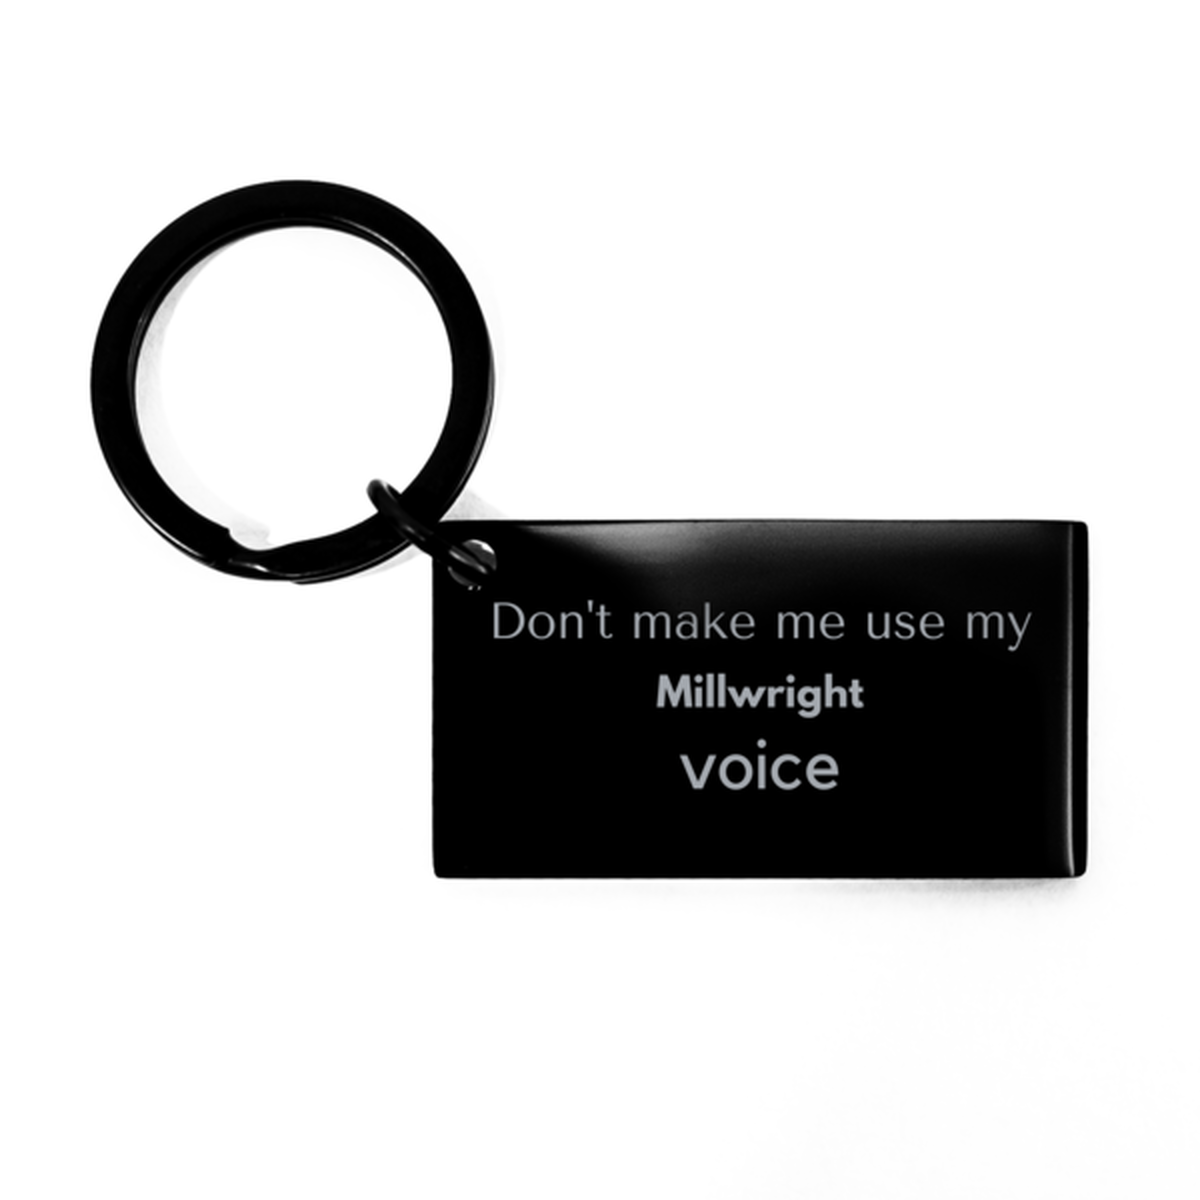 Don't make me use my Millwright voice, Sarcasm Millwright Gifts, Christmas Millwright Keychain Birthday Unique Gifts For Millwright Coworkers, Men, Women, Colleague, Friends